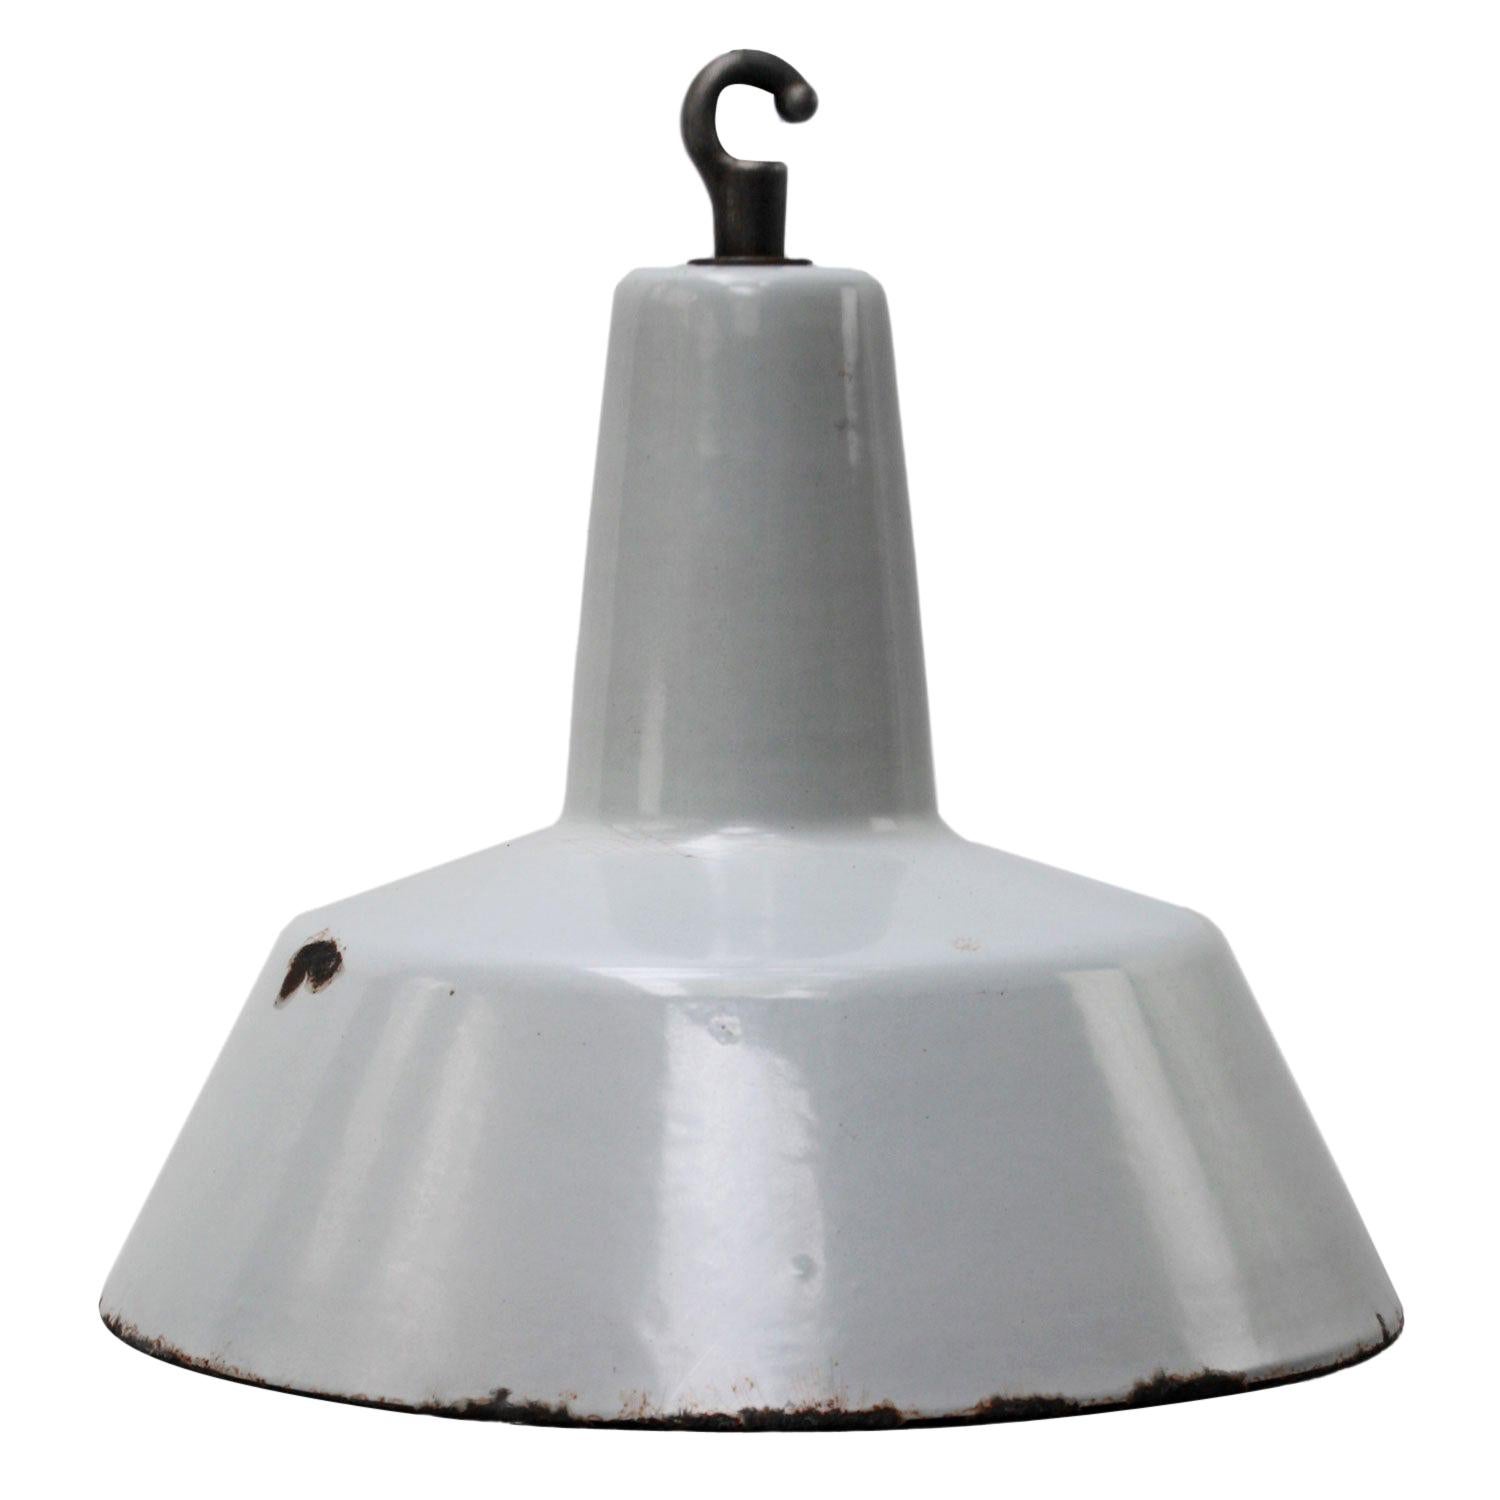 Gray Enamel Vintage Industrial Hanging Lamp Pendant by Philips For Sale